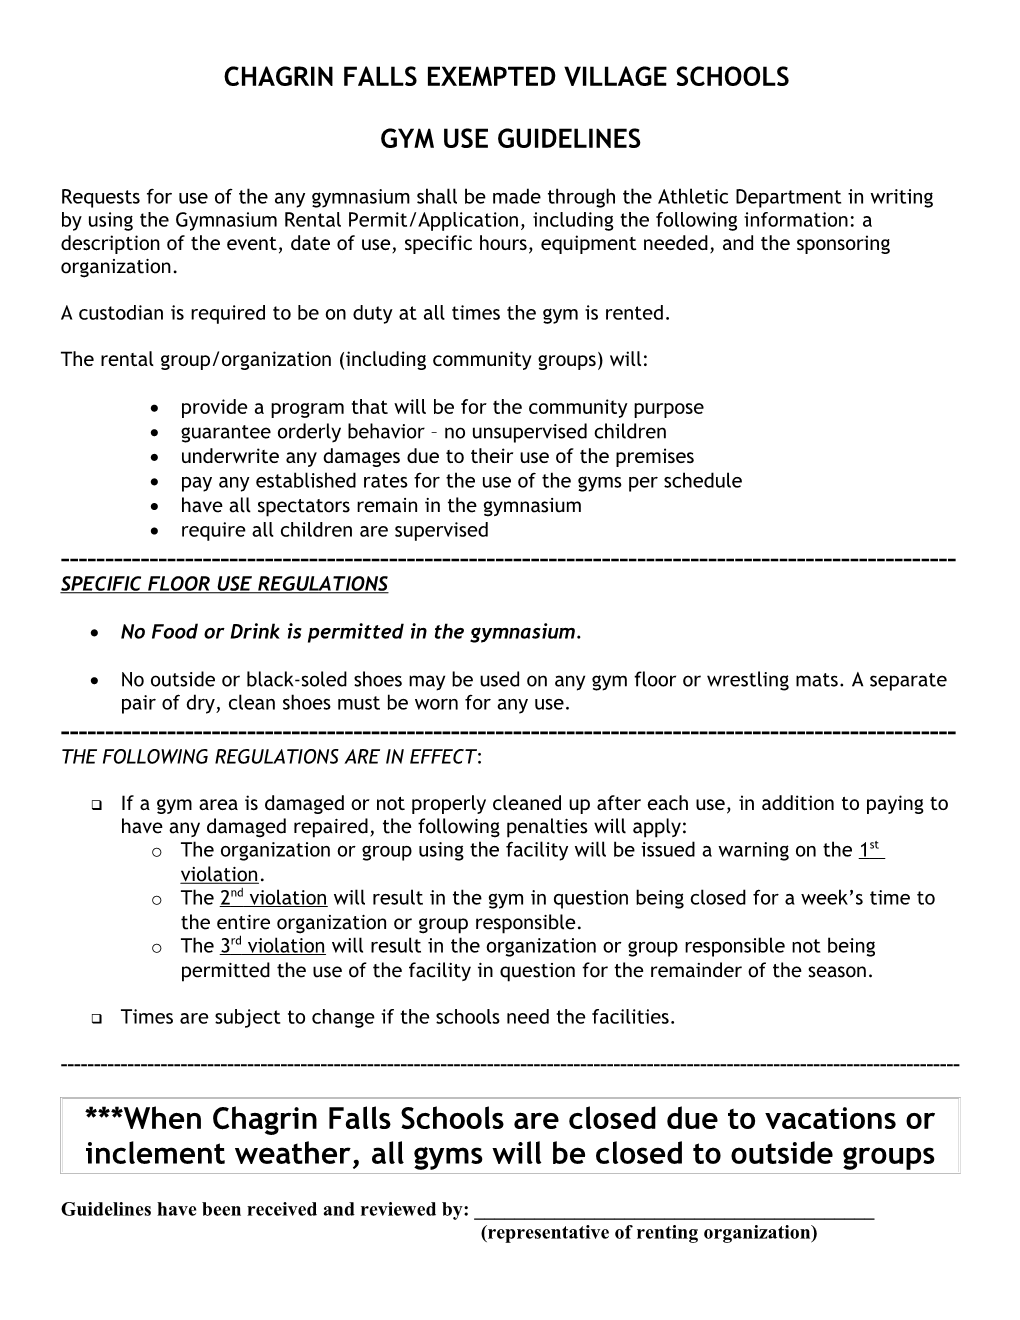 Chagrin Falls Schools Gym Use Guidelines